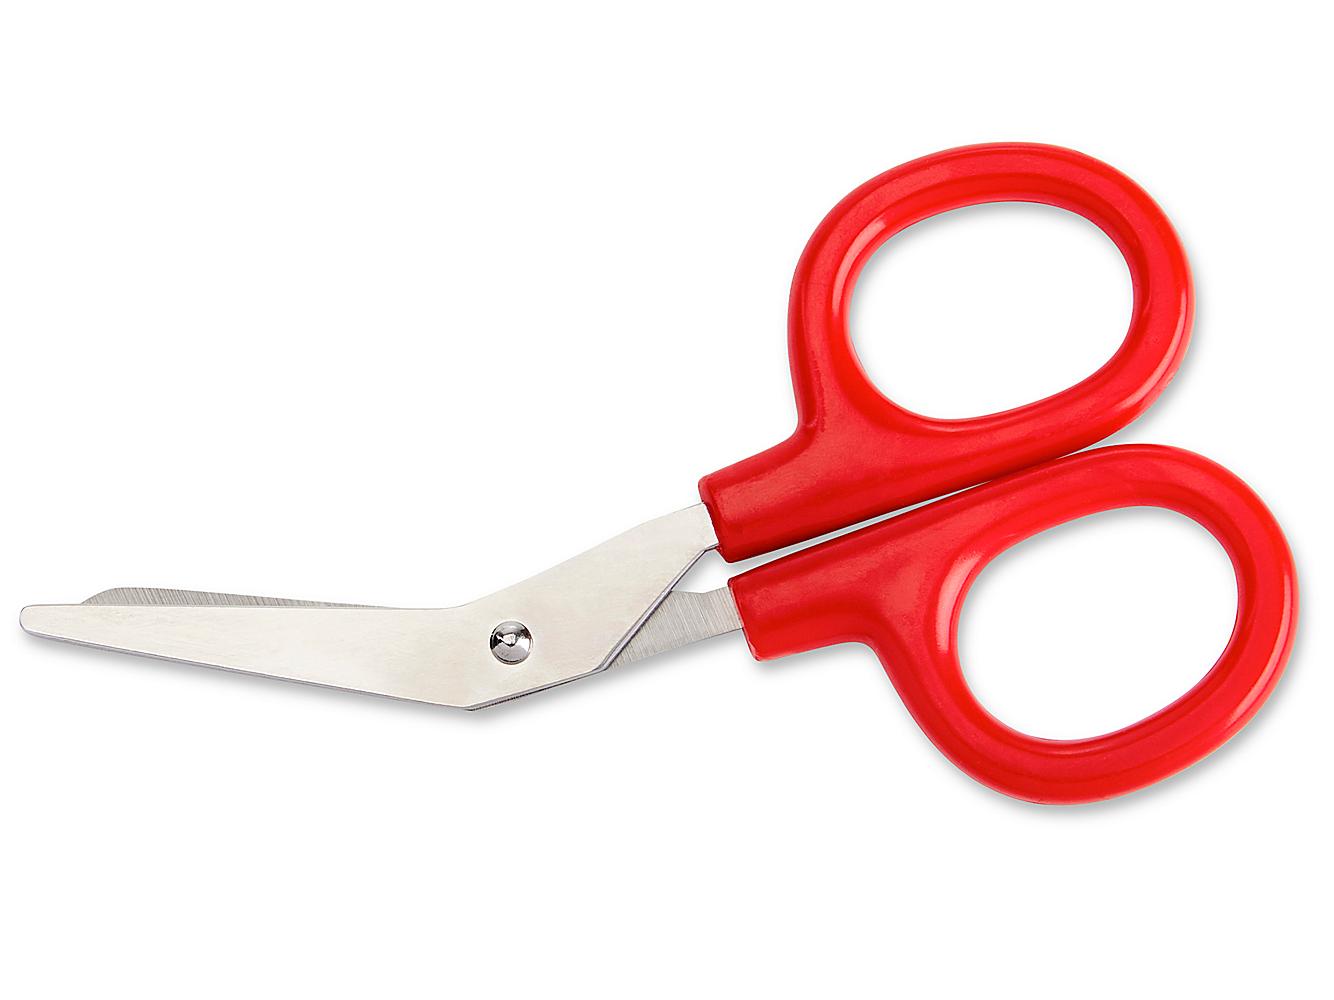 What Is The Use Of Scissors In A First Aid Kit